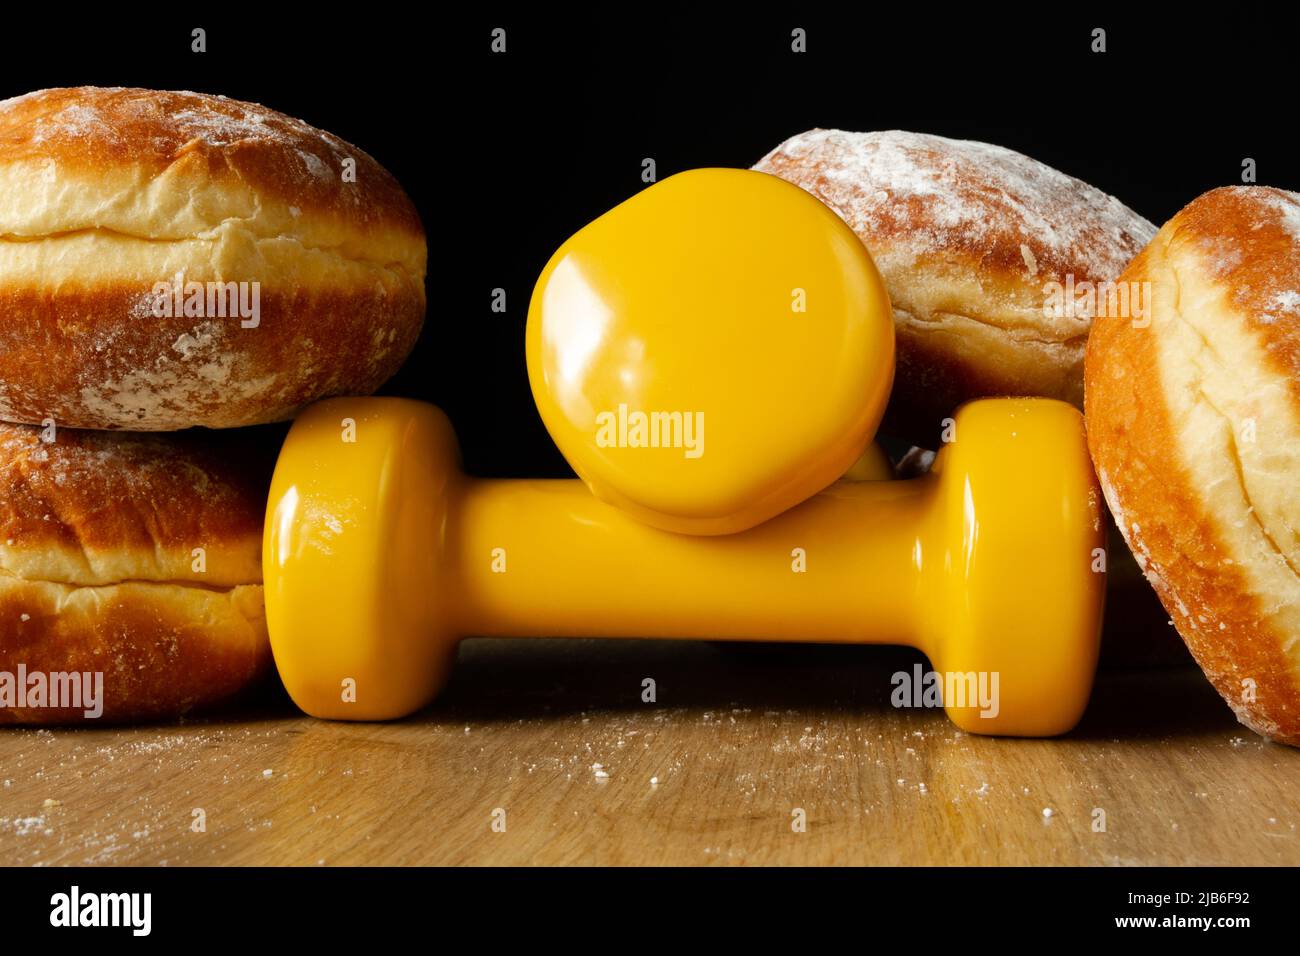 Dumbbells and Polish pączki deep-fried doughnuts. Fat thursday pączek, traditional feast day in Poland. Healthy fitness gym workout. Stock Photo